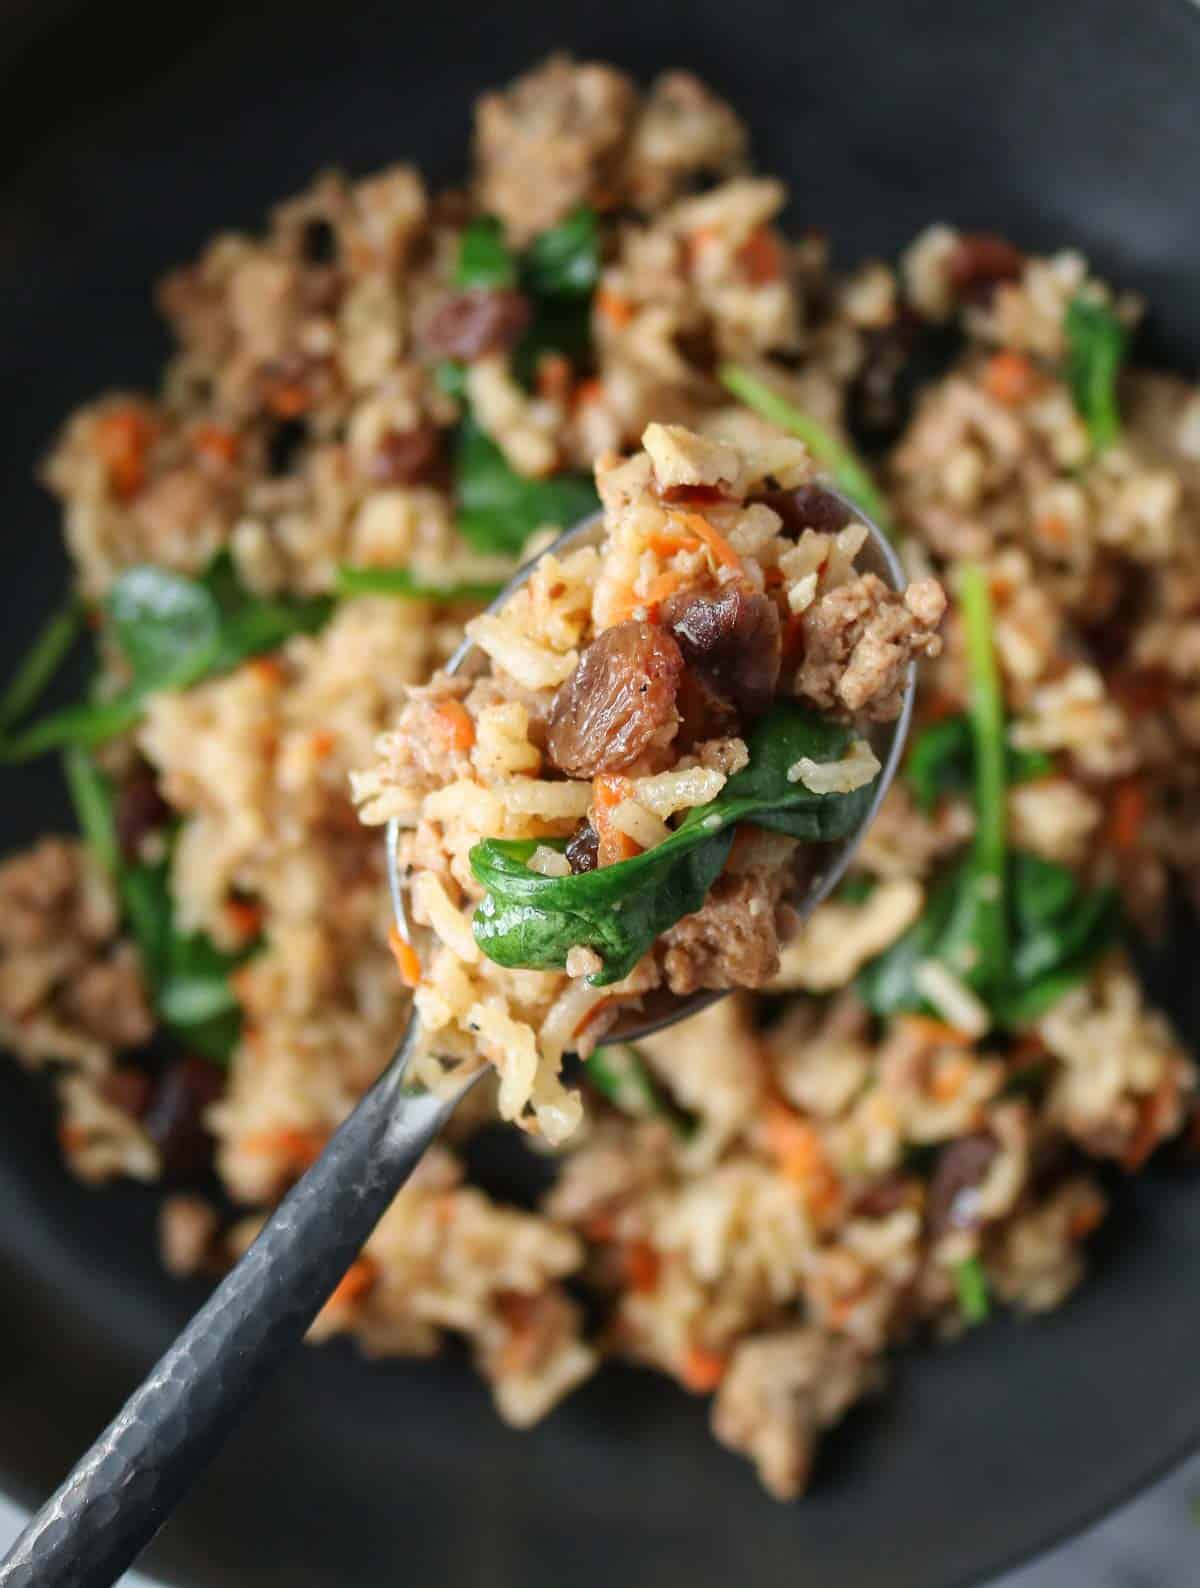 Spoonful of a ground chicken and rice skillet from a bowl.